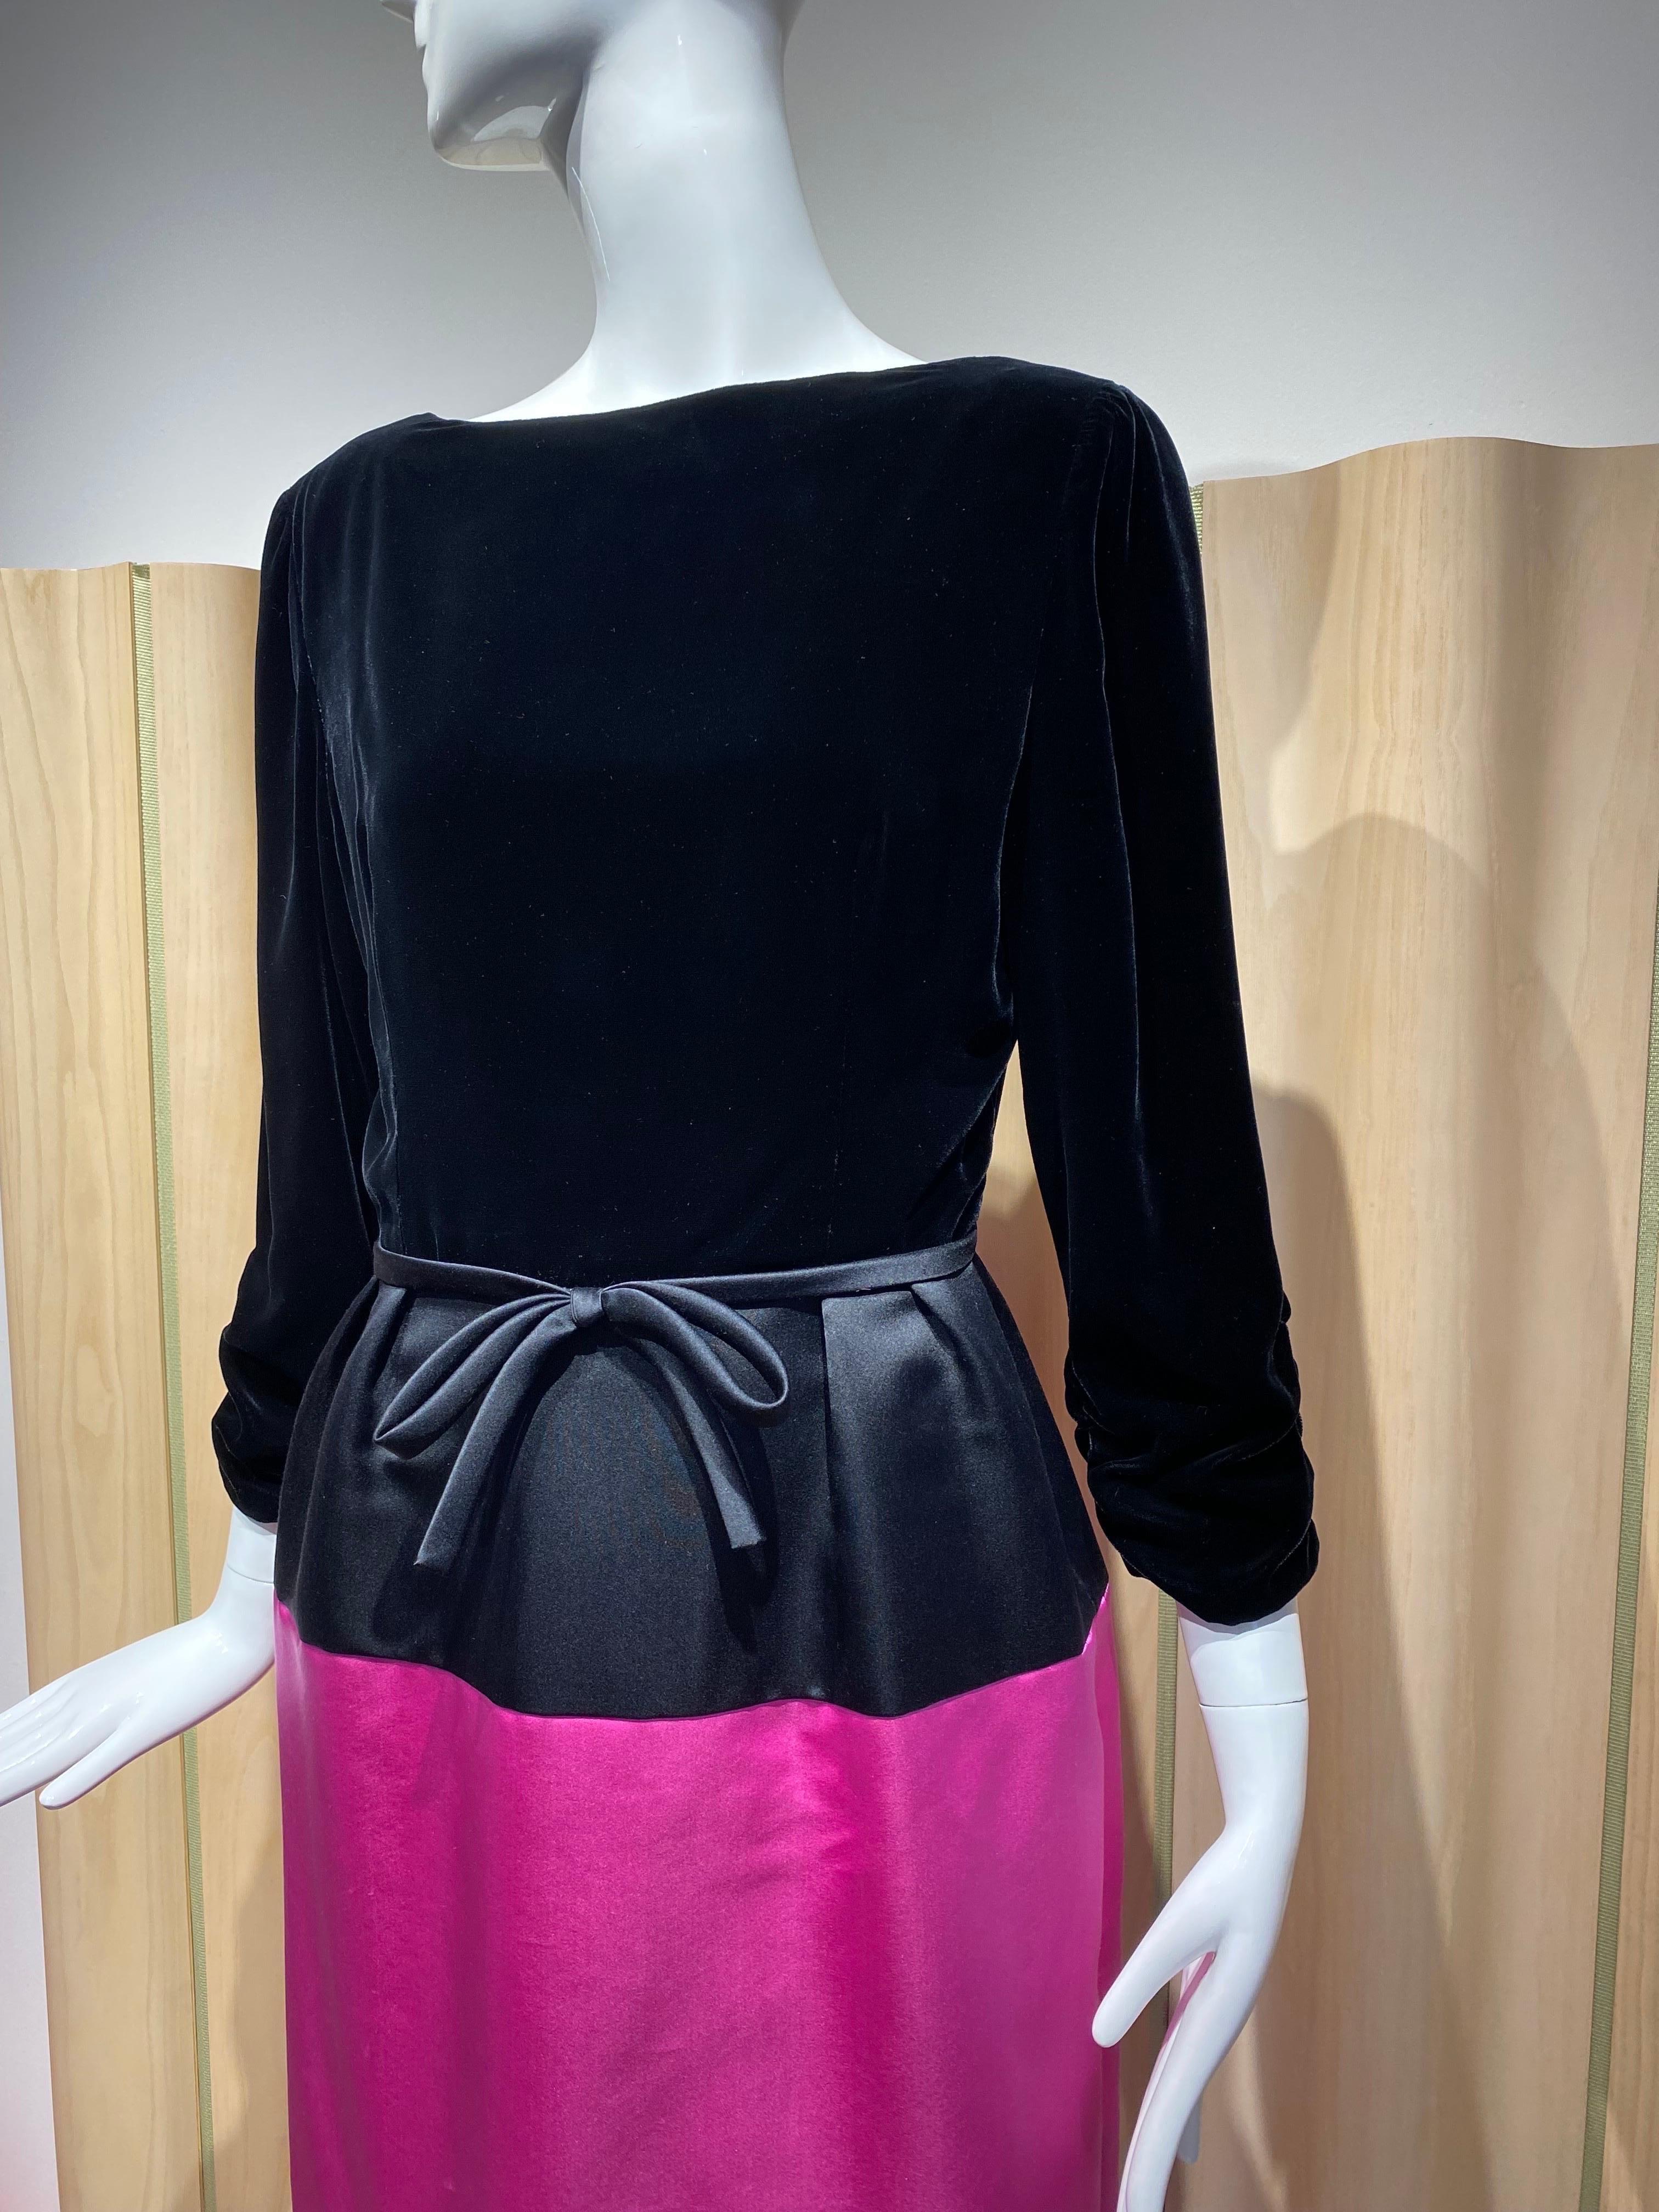 1980s Bill Blass Black and Pink Cocktail Dress For Sale 2